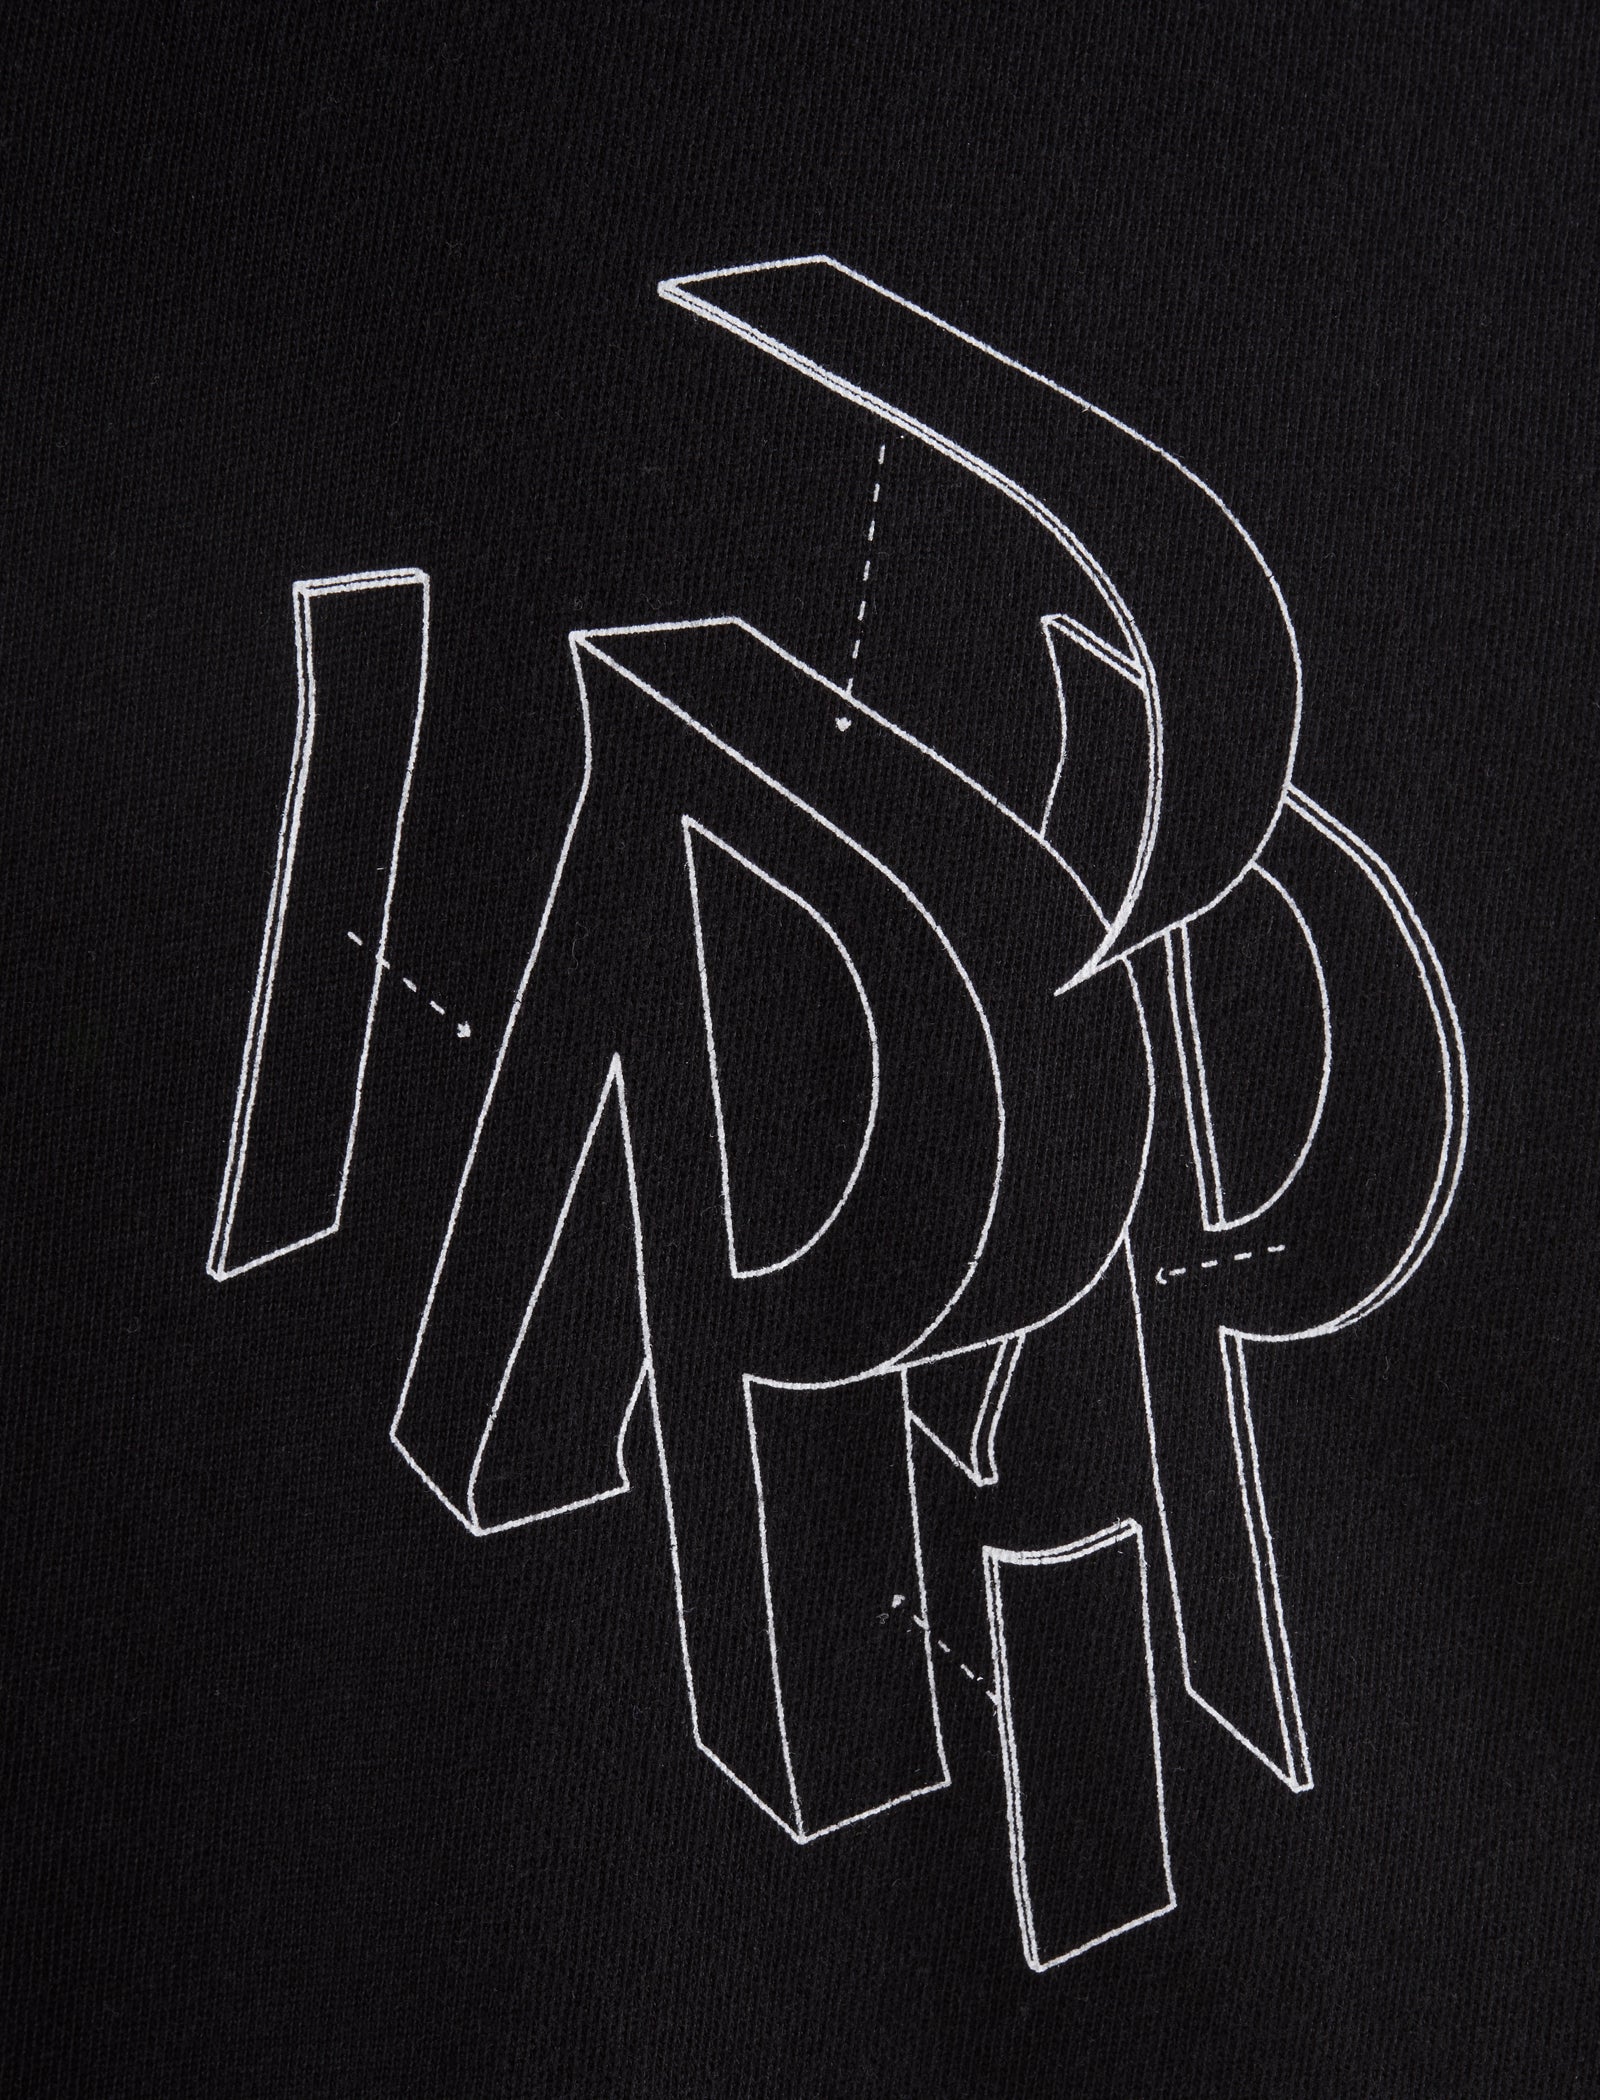 INITIAL ASSEMBLY OUTLINE TEE